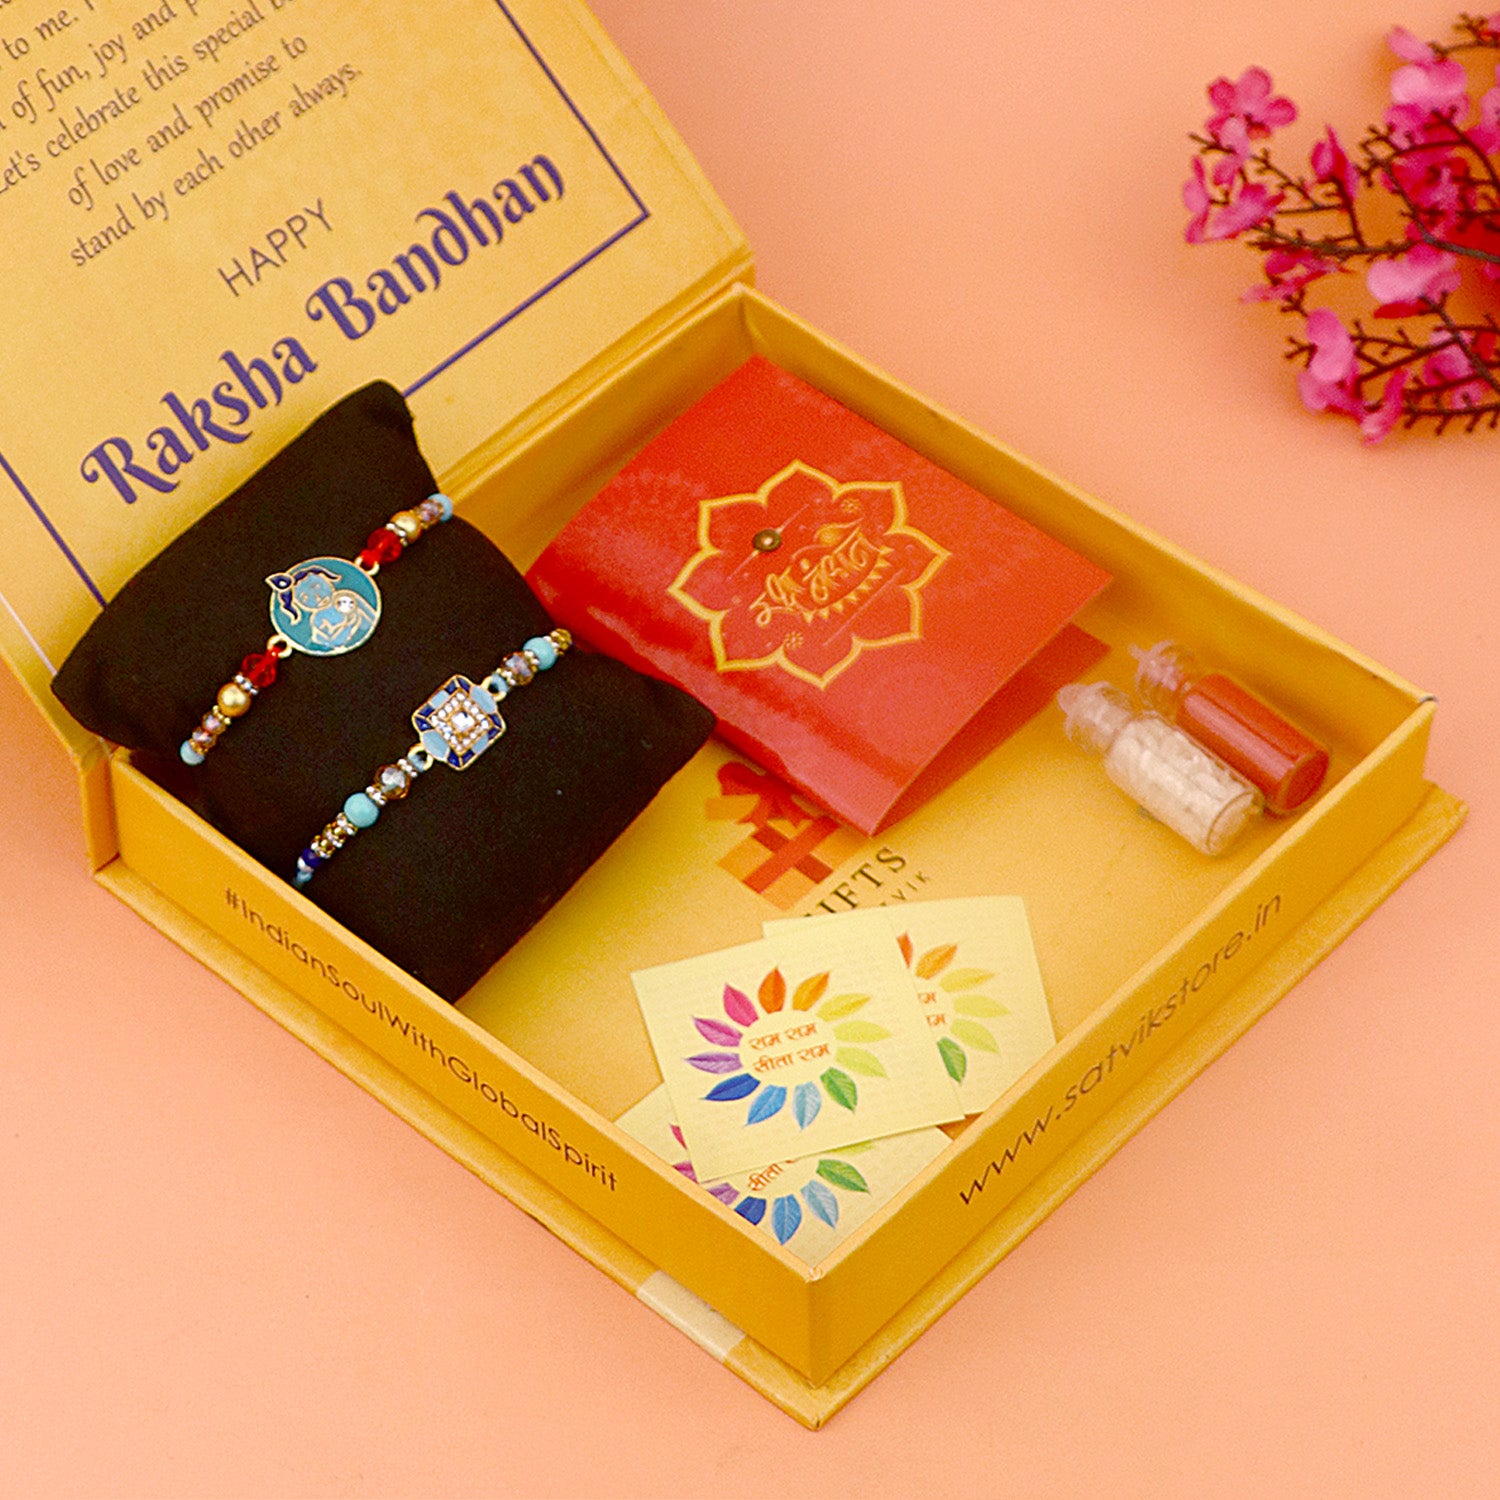 Buy Delicious Gifts On Rakhi From Quicklly Moments